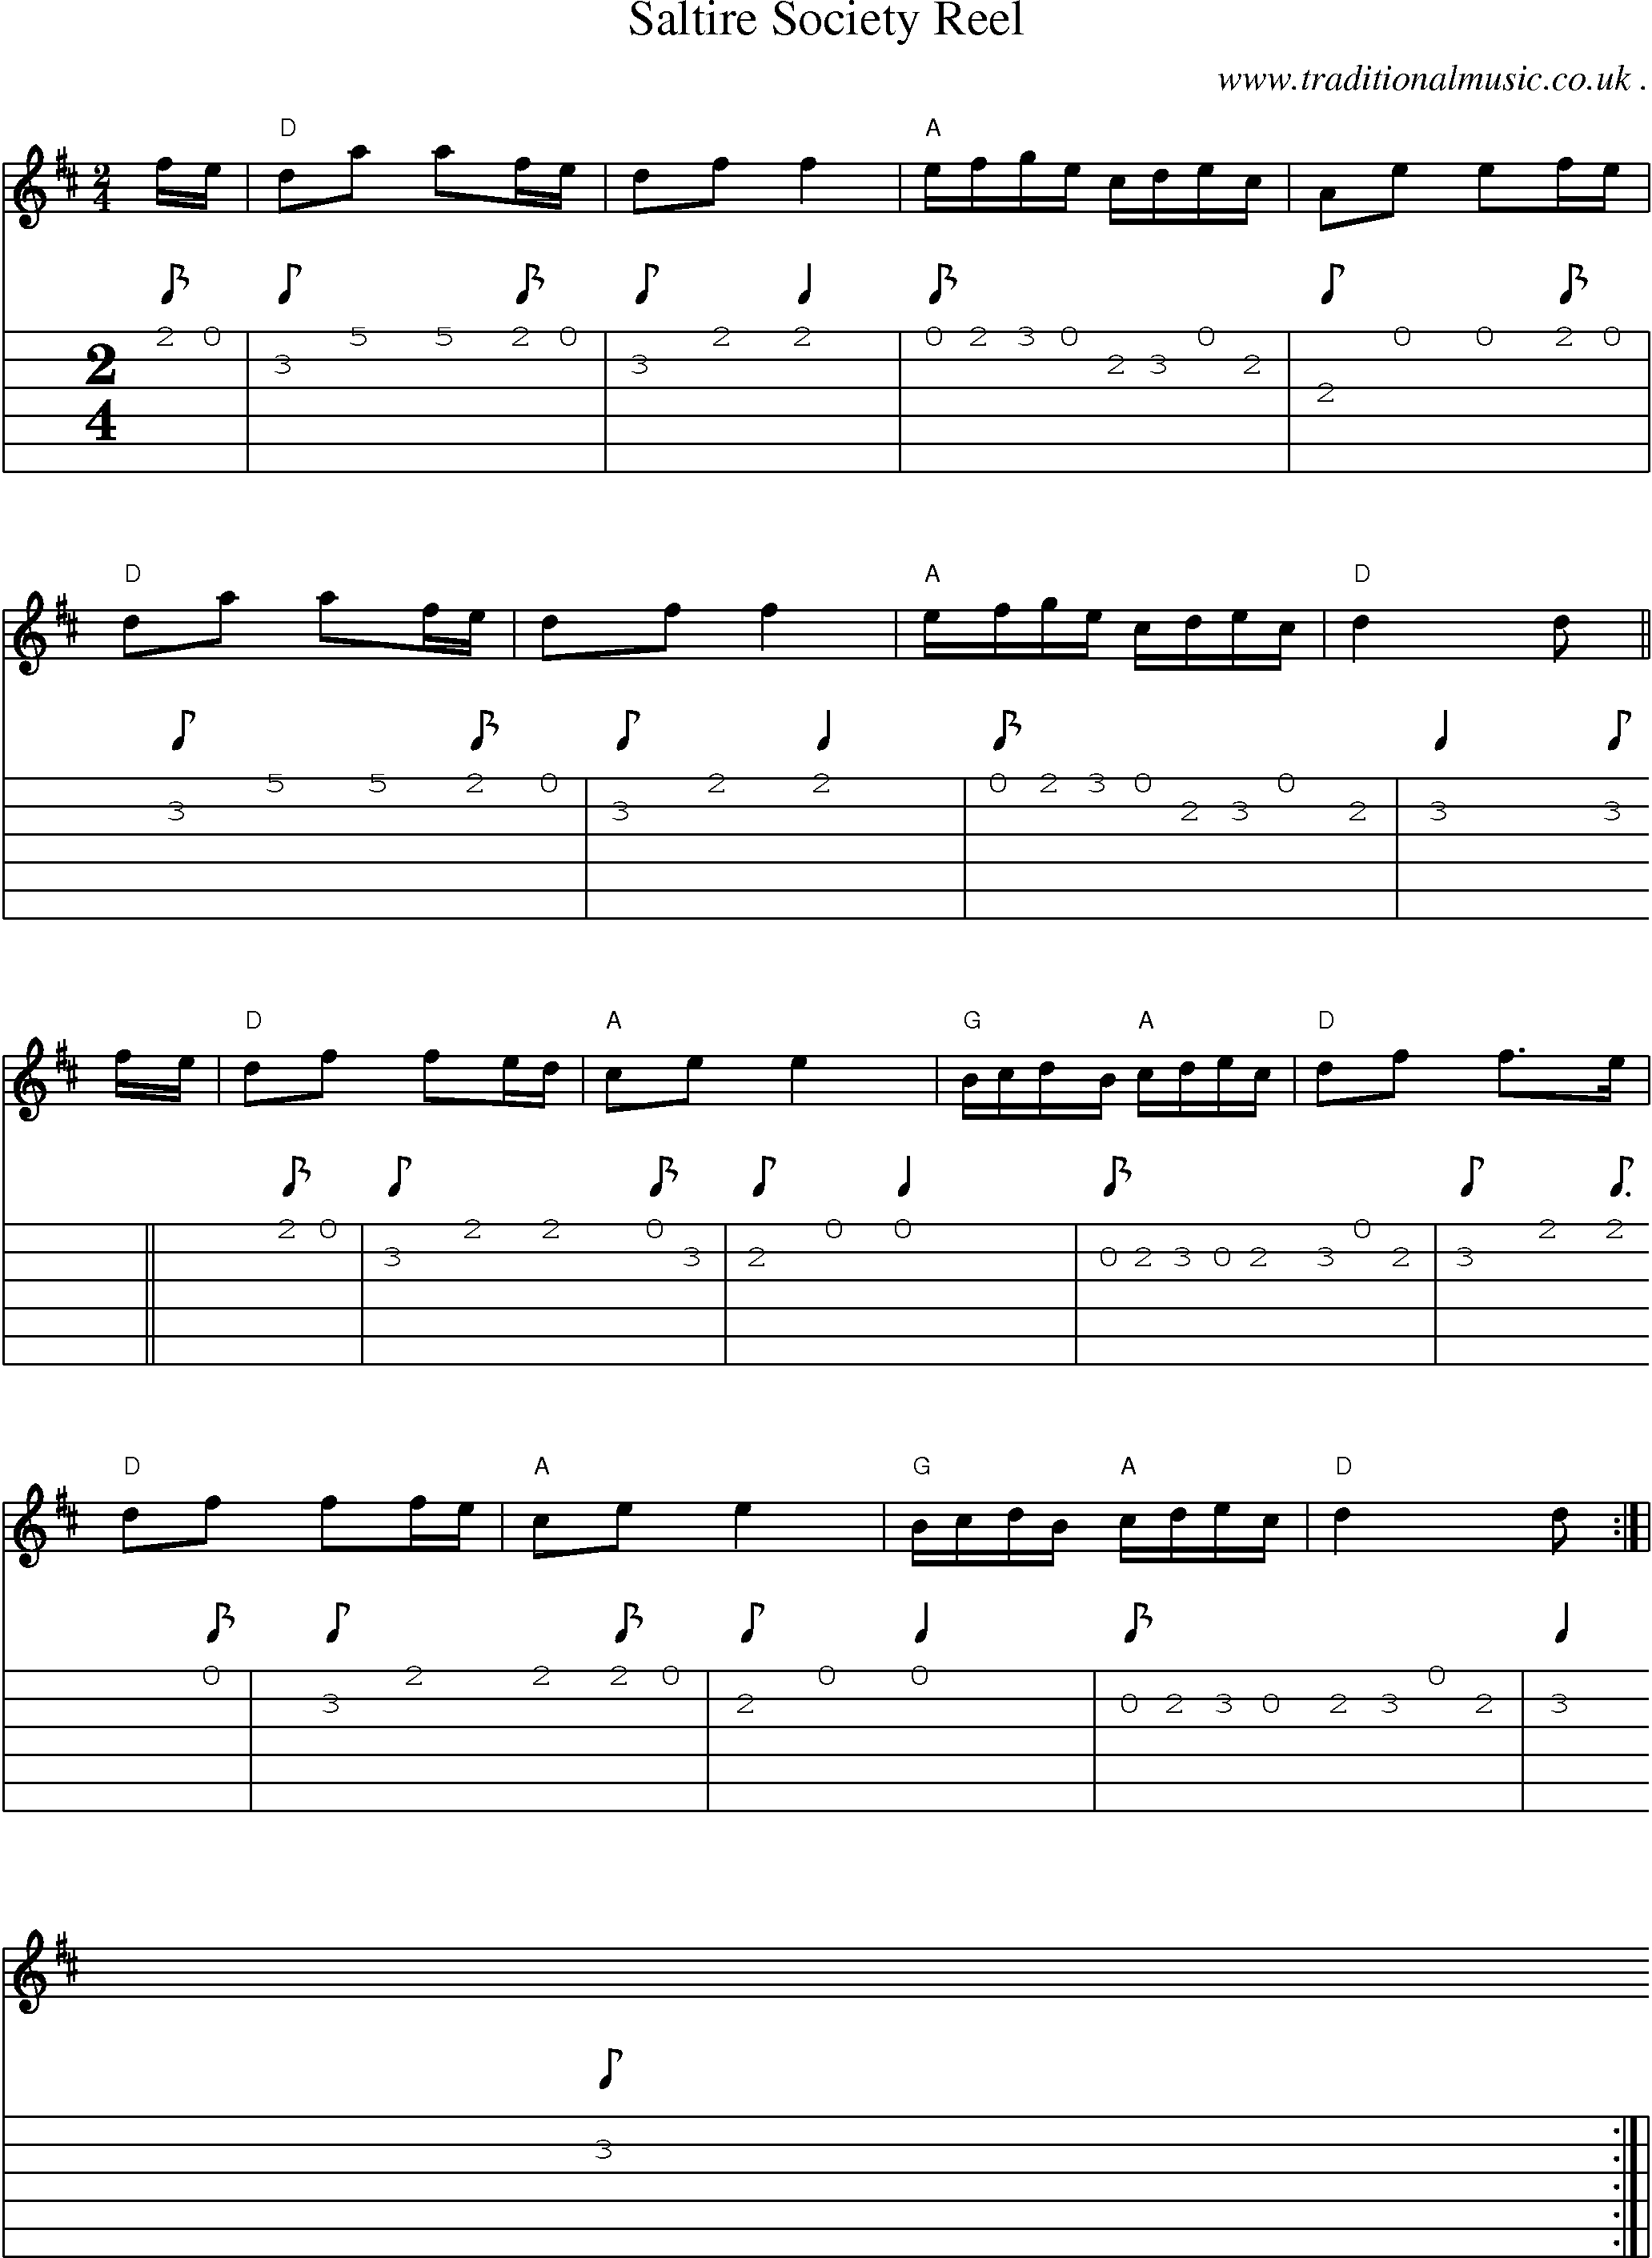 Sheet-music  score, Chords and Guitar Tabs for Saltire Society Reel